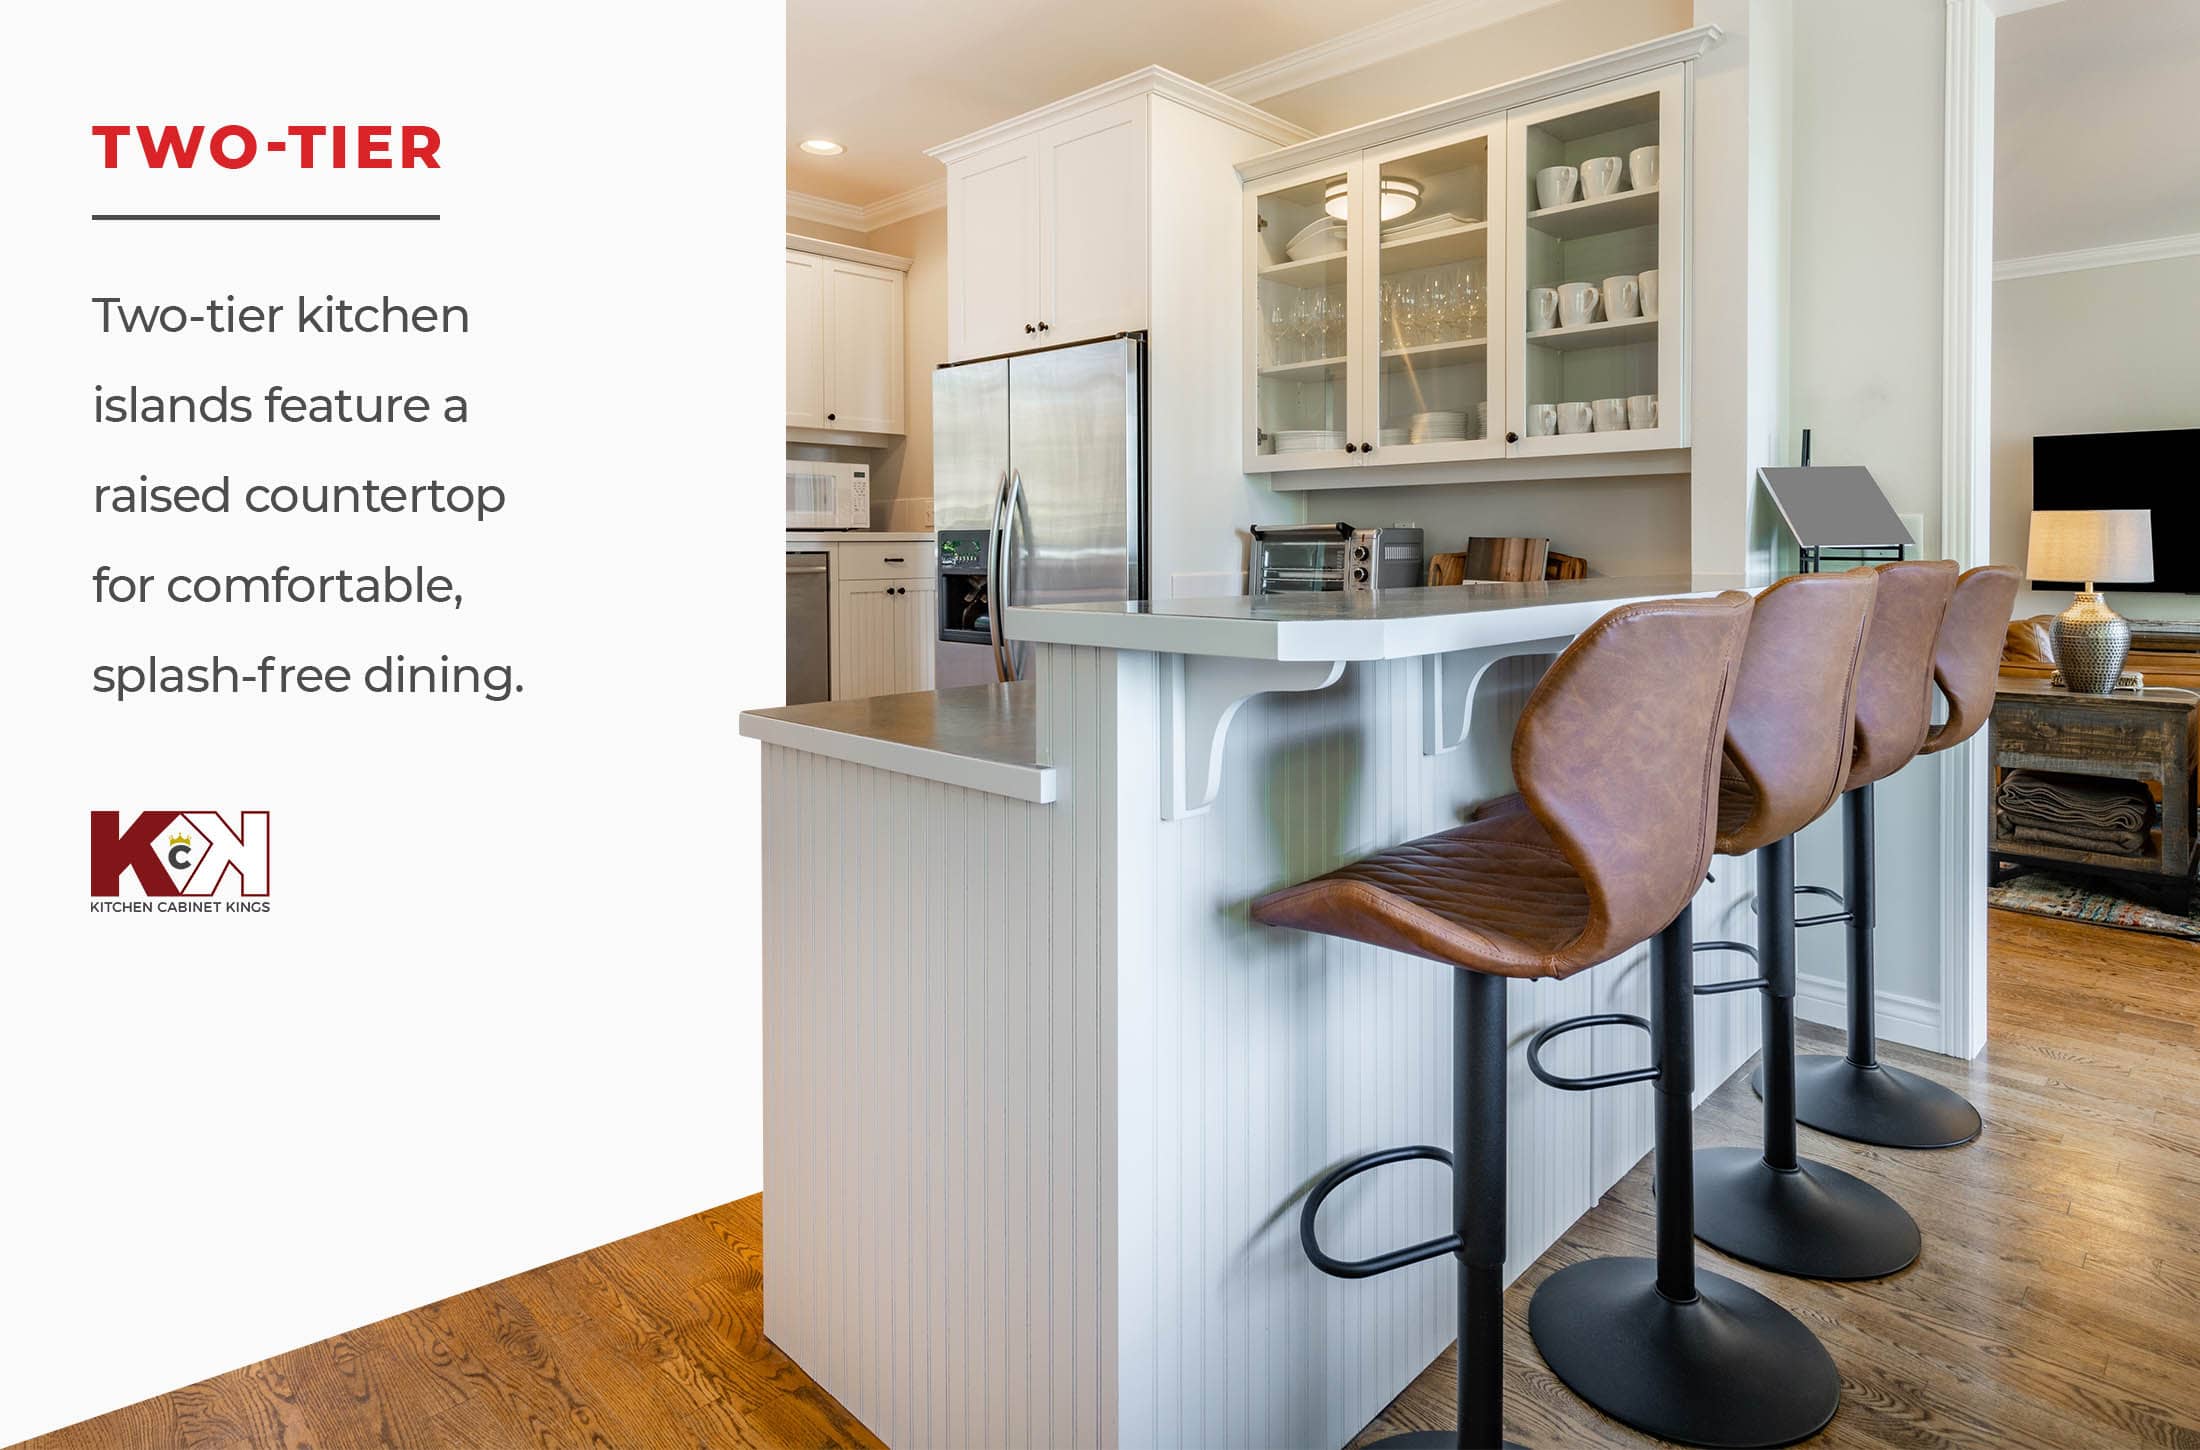 Image and definition of two-tier kitchen island.